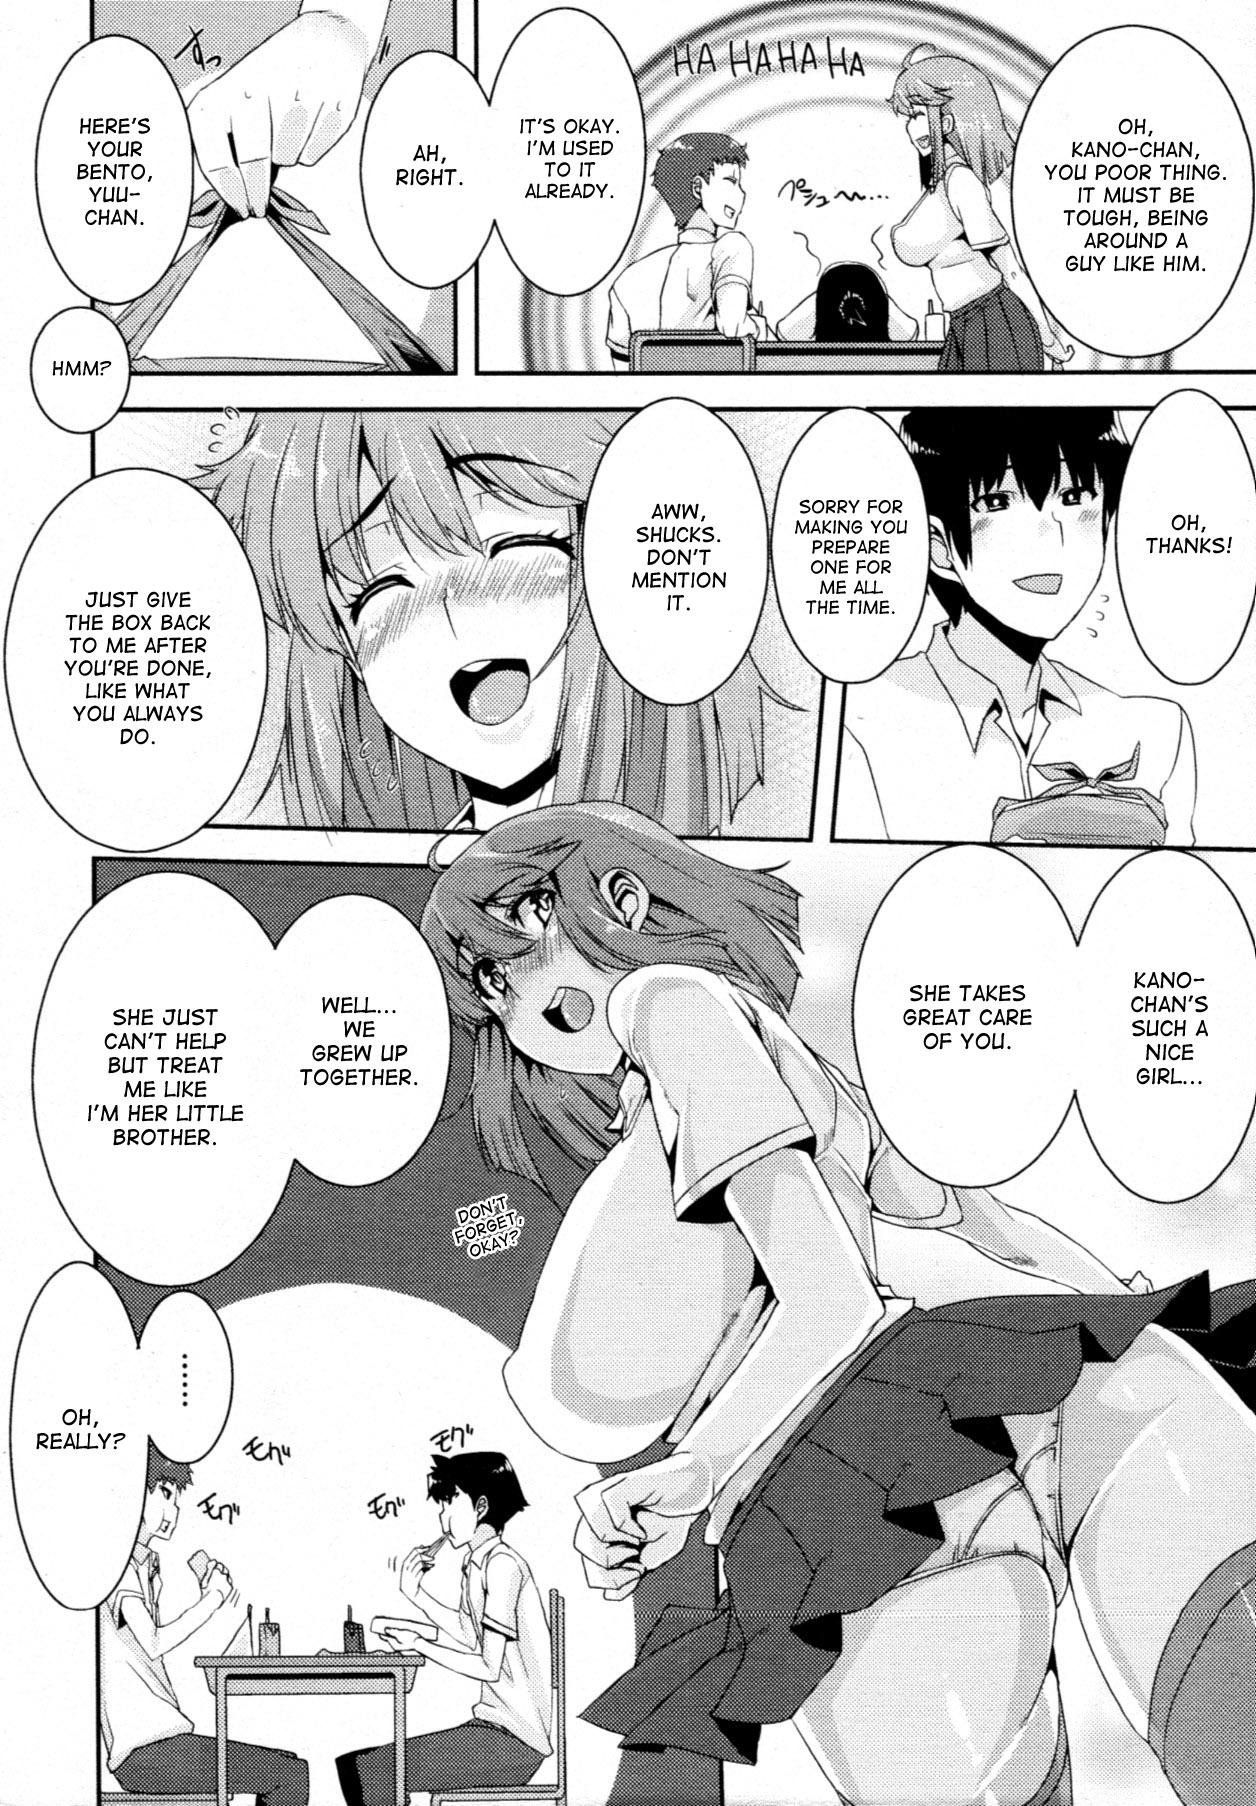 Celeb Chijo-sama no Jijou | The Perverted Lady's Circumstances Submission - Page 4